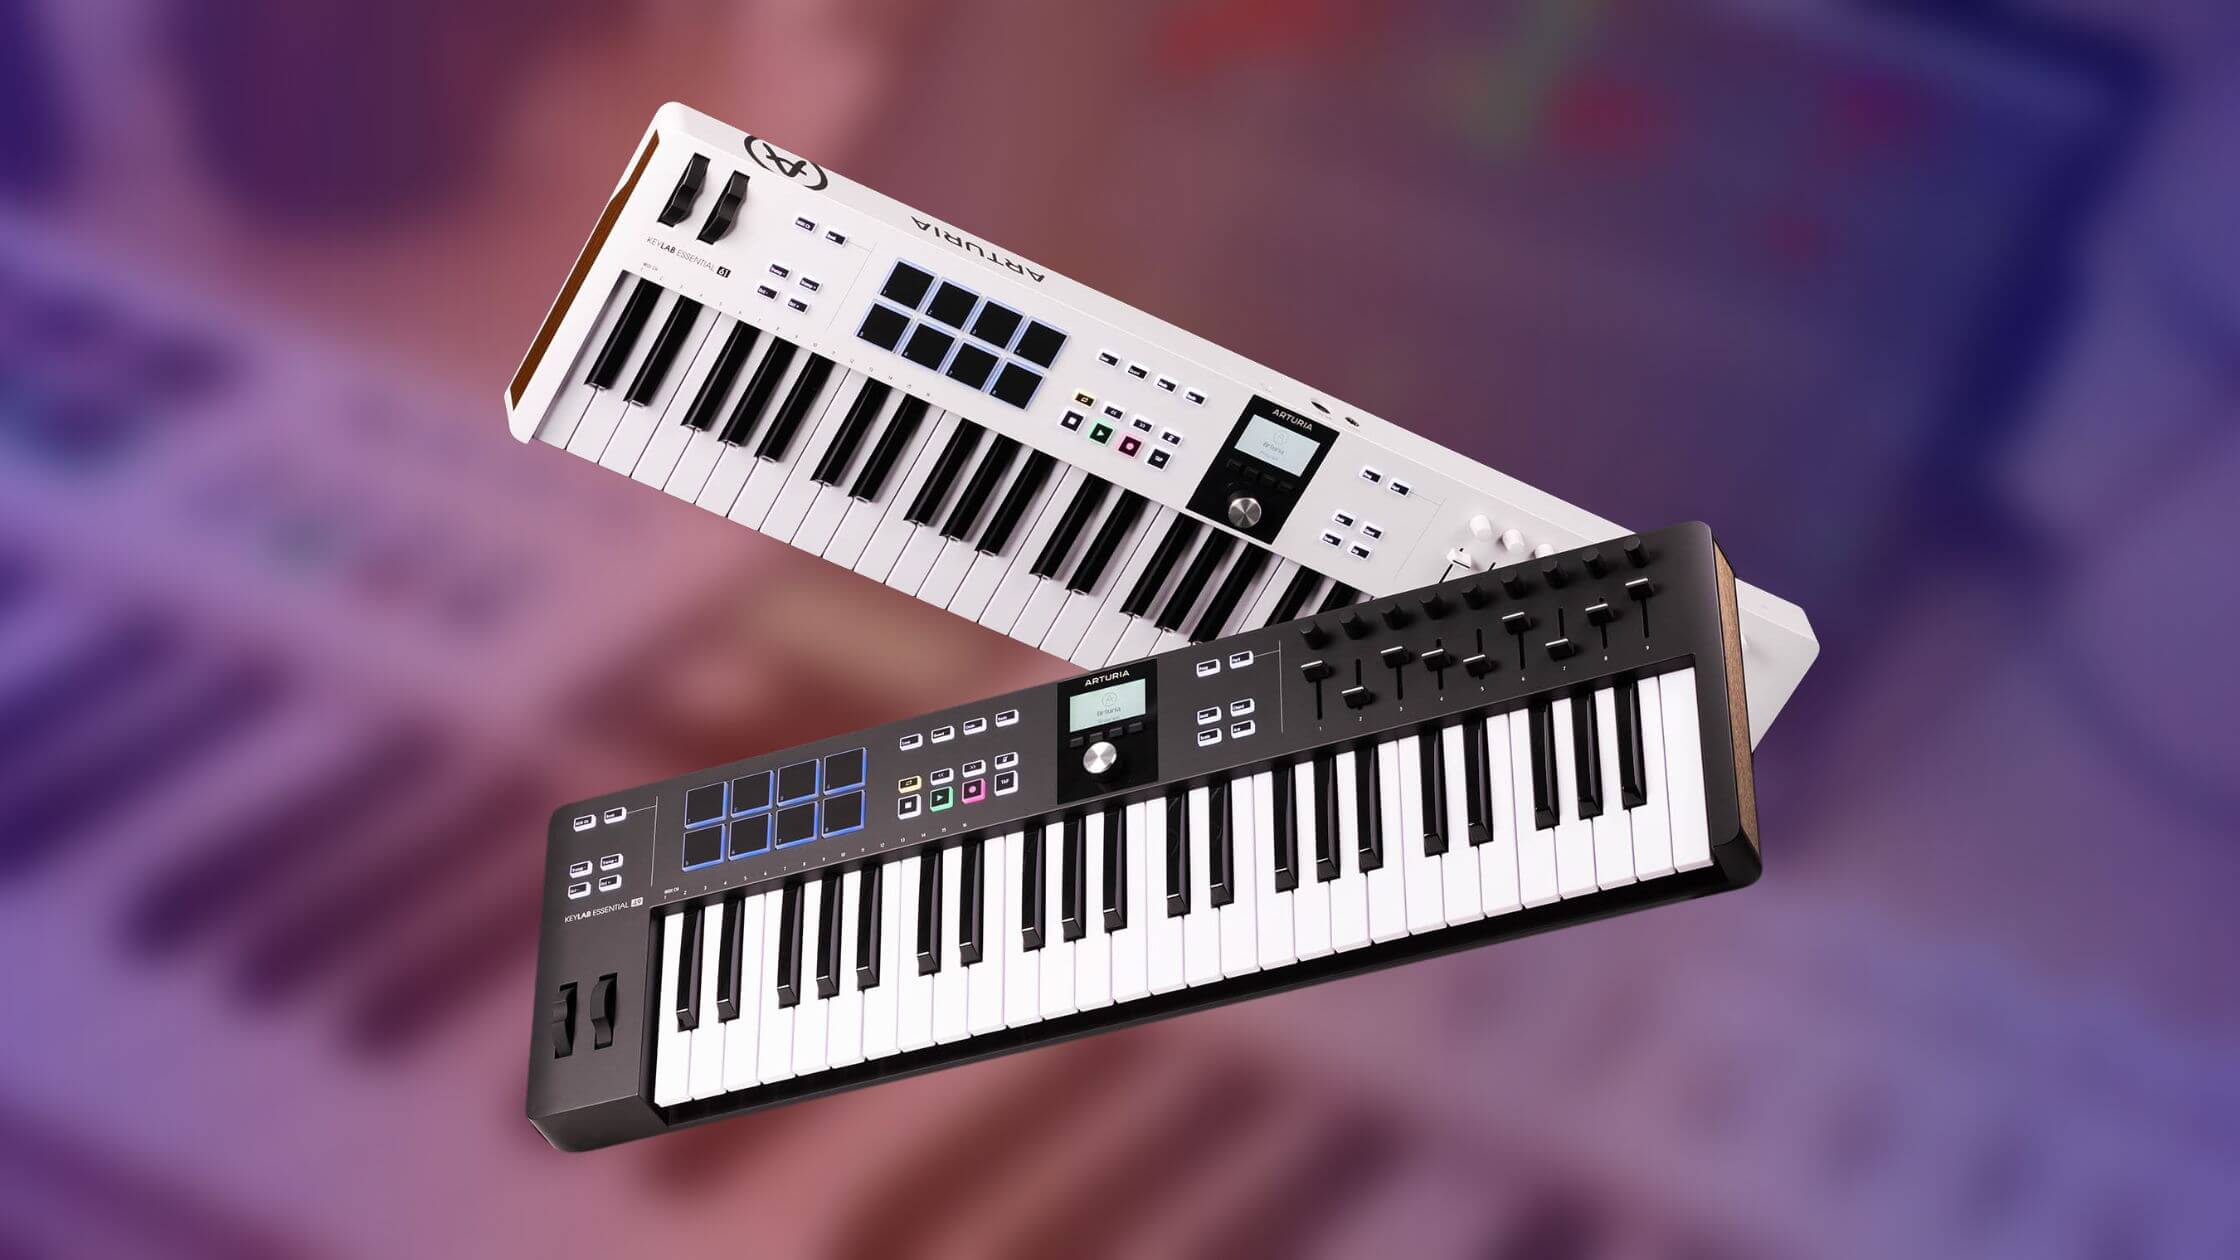 Arturia release KeyLab Mk3 – a slick new look, smooth workflow, and lots of versatility for modern producers